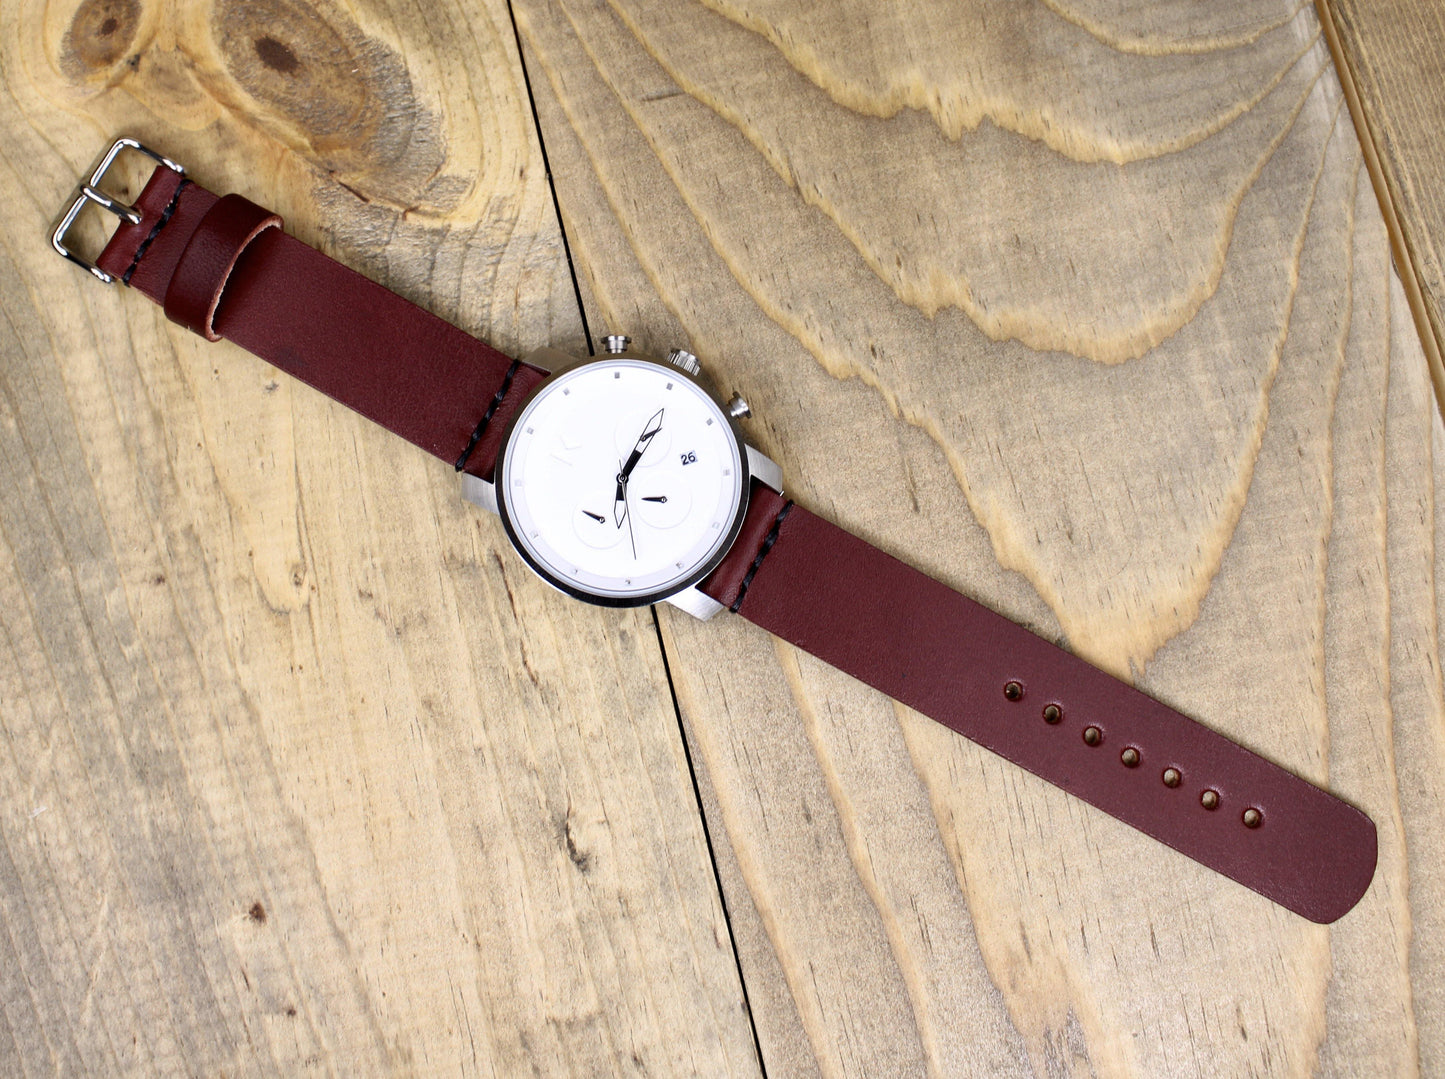 Burgundy Leather Watch Band. Spring Bar leather watch strap. handmade leather watch band. Wickett and Craig leather watch band. 3rd anniversary leather gift. leather watch band for men or women. 